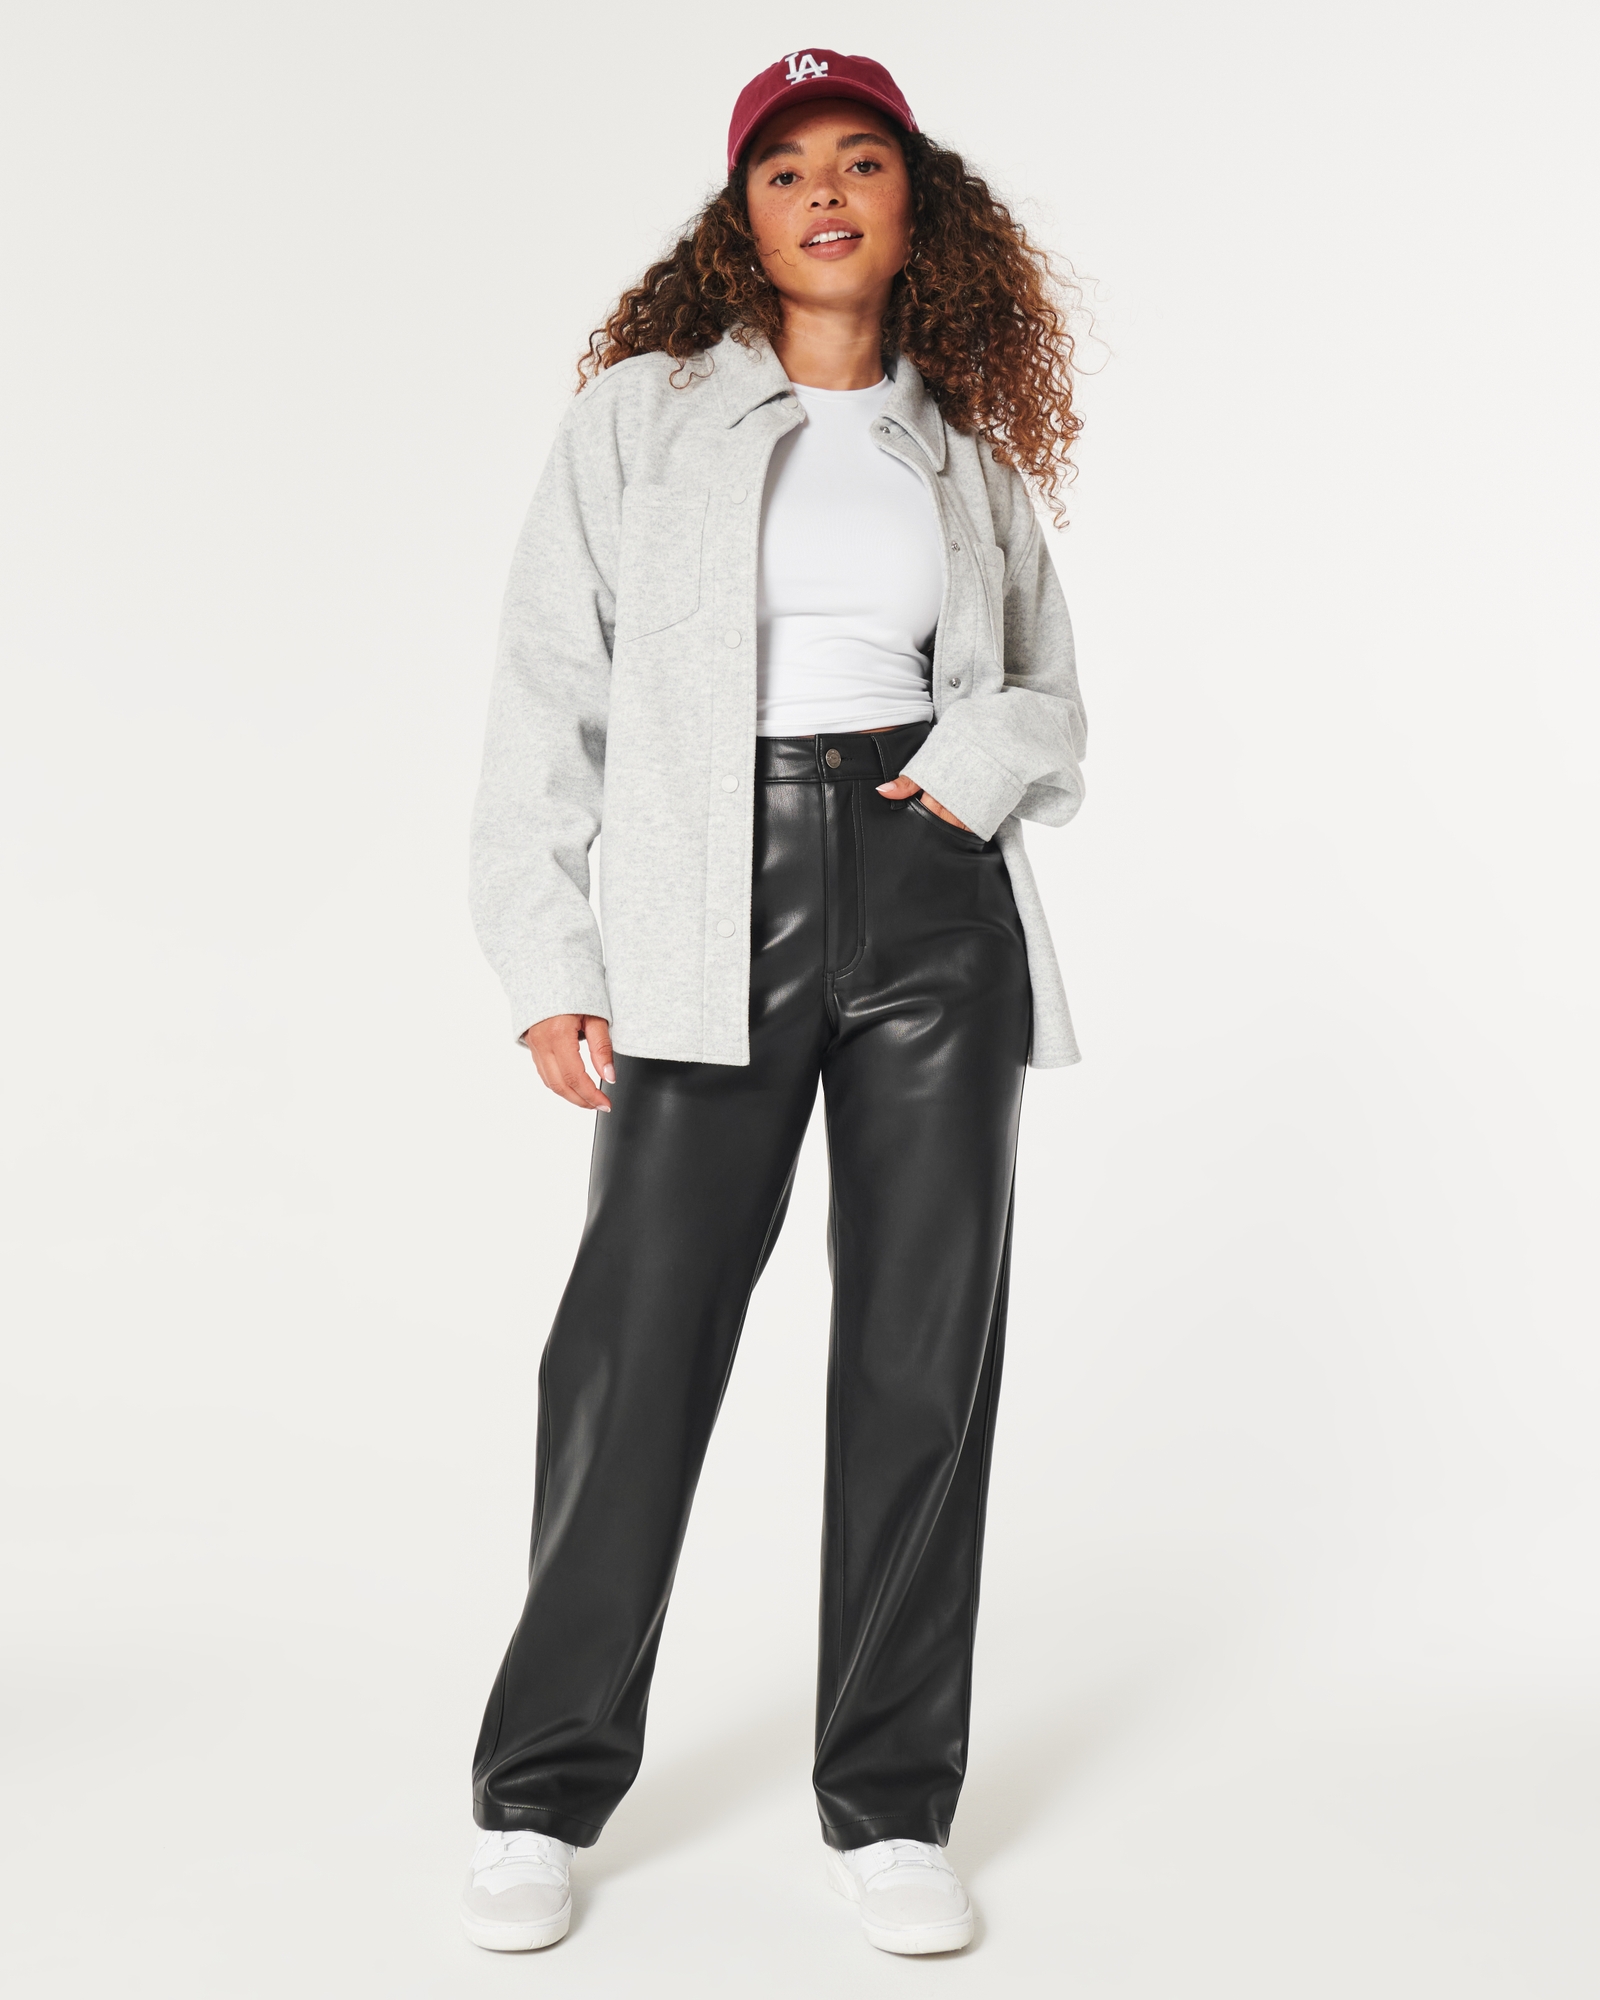 Women's Ultra High-Rise Vegan Leather Dad Pants, Women's Clearance